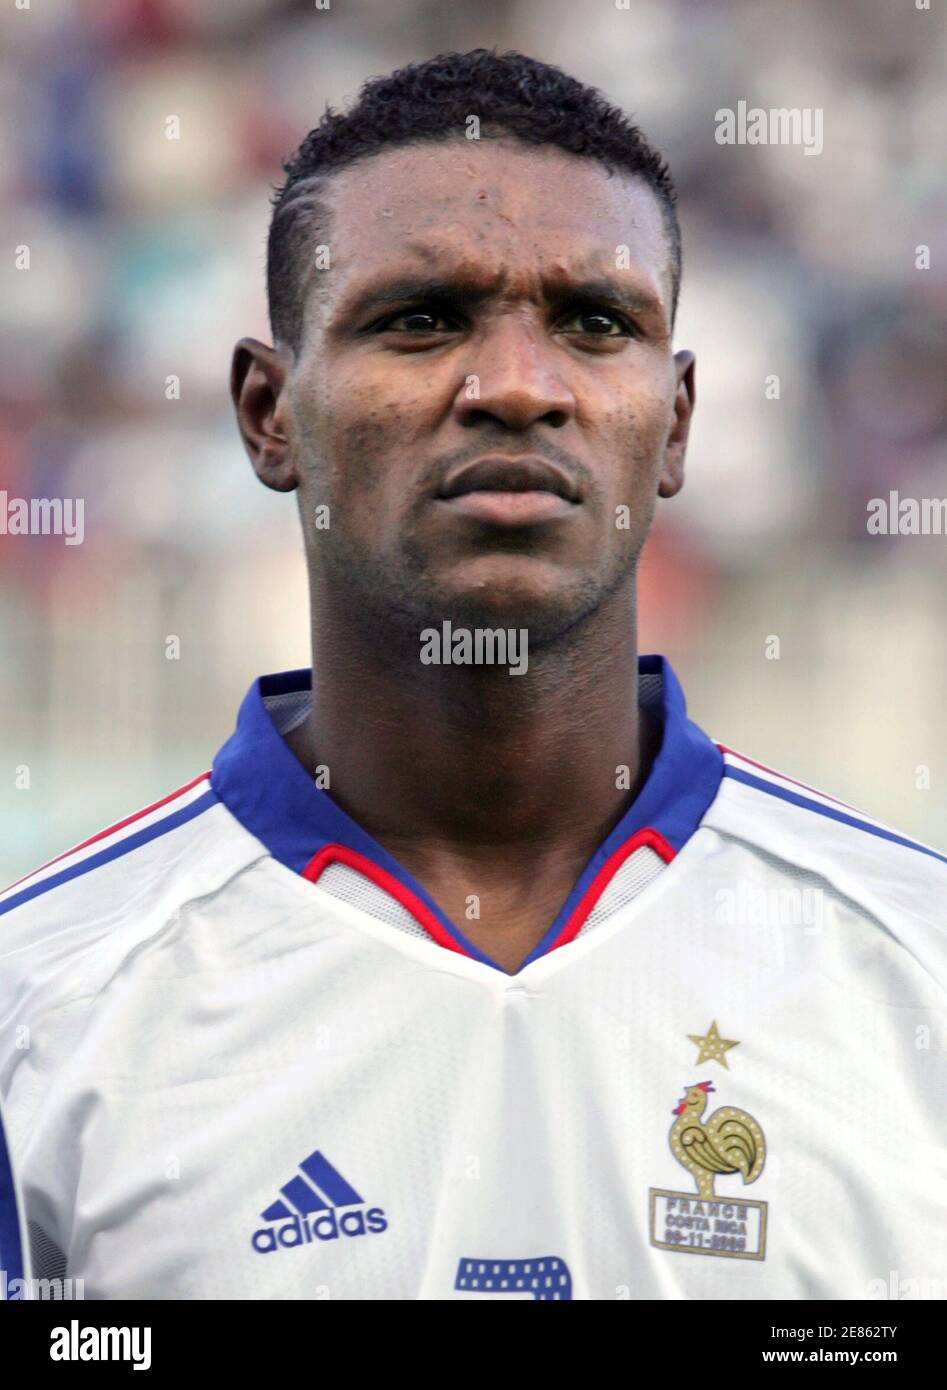 Olympique Lyon defender Eric Abidal, seen in this file photo from November  9, 2005 in La Martinique, listens to national athems before a friendly  international soccer match against Costa Rica where he